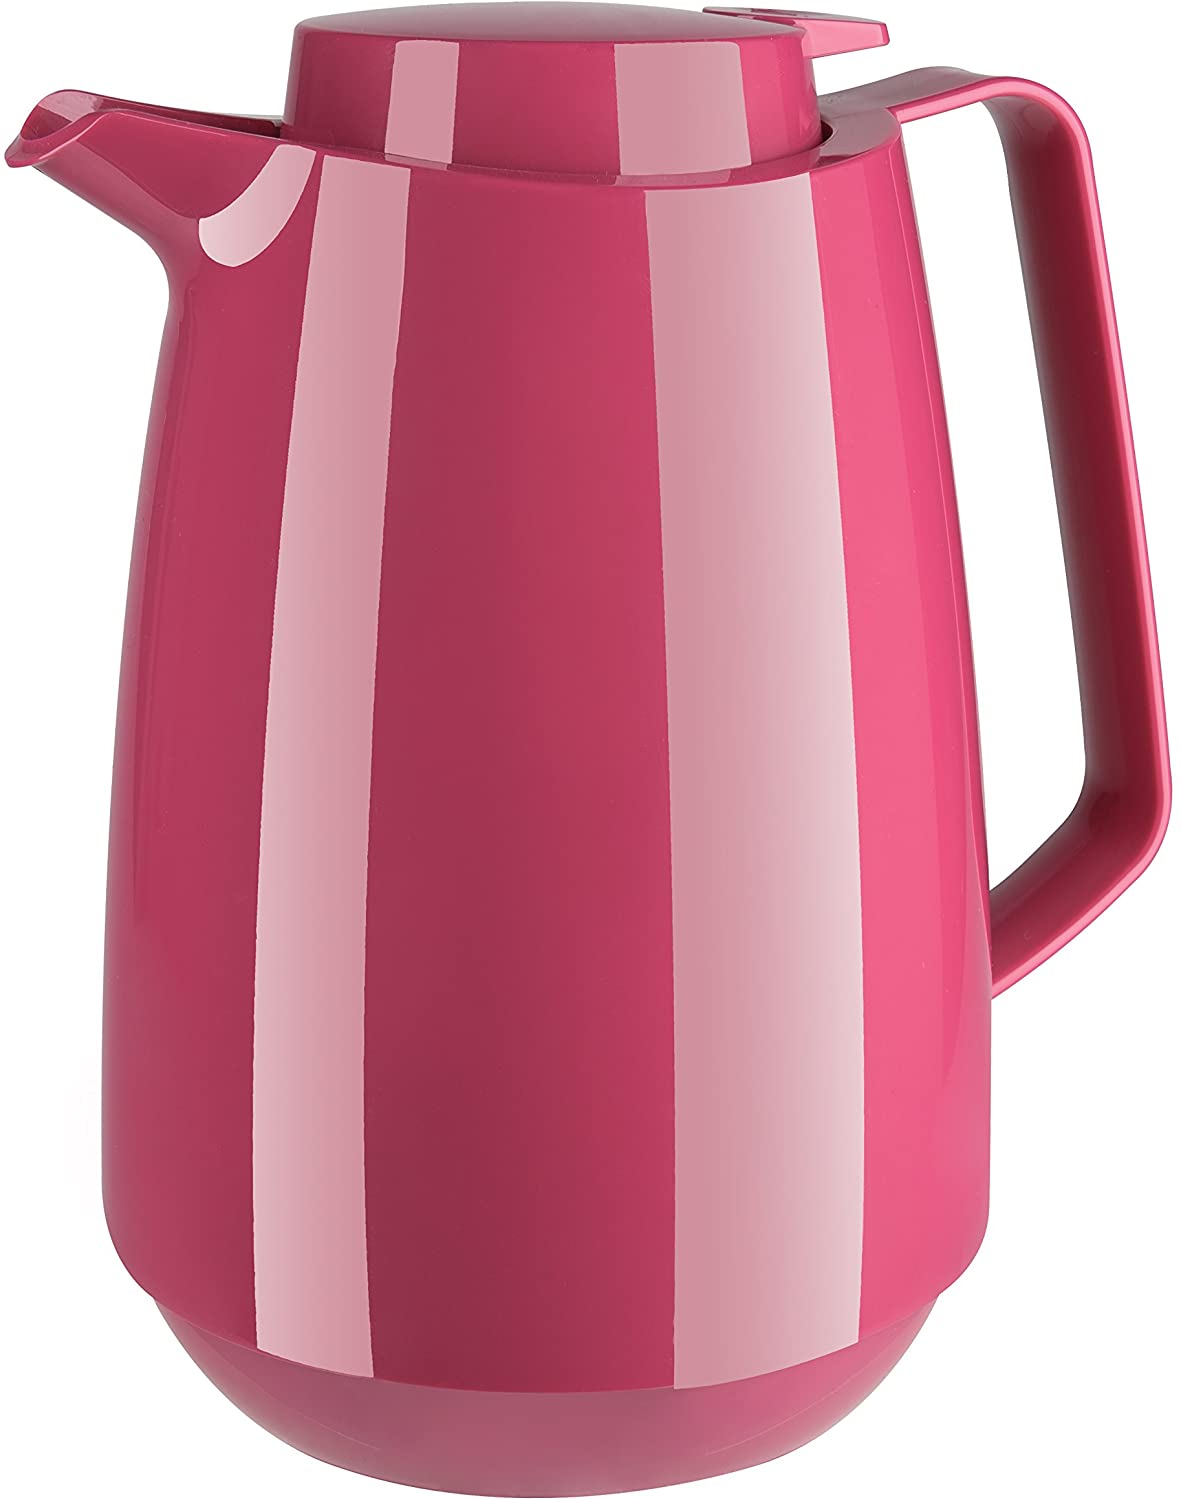 Emsa 515845 Insulated Flask 1 Litre Momento Coffee – 100% Leak Proof 12 Standard Hot/24 Cold, Pink